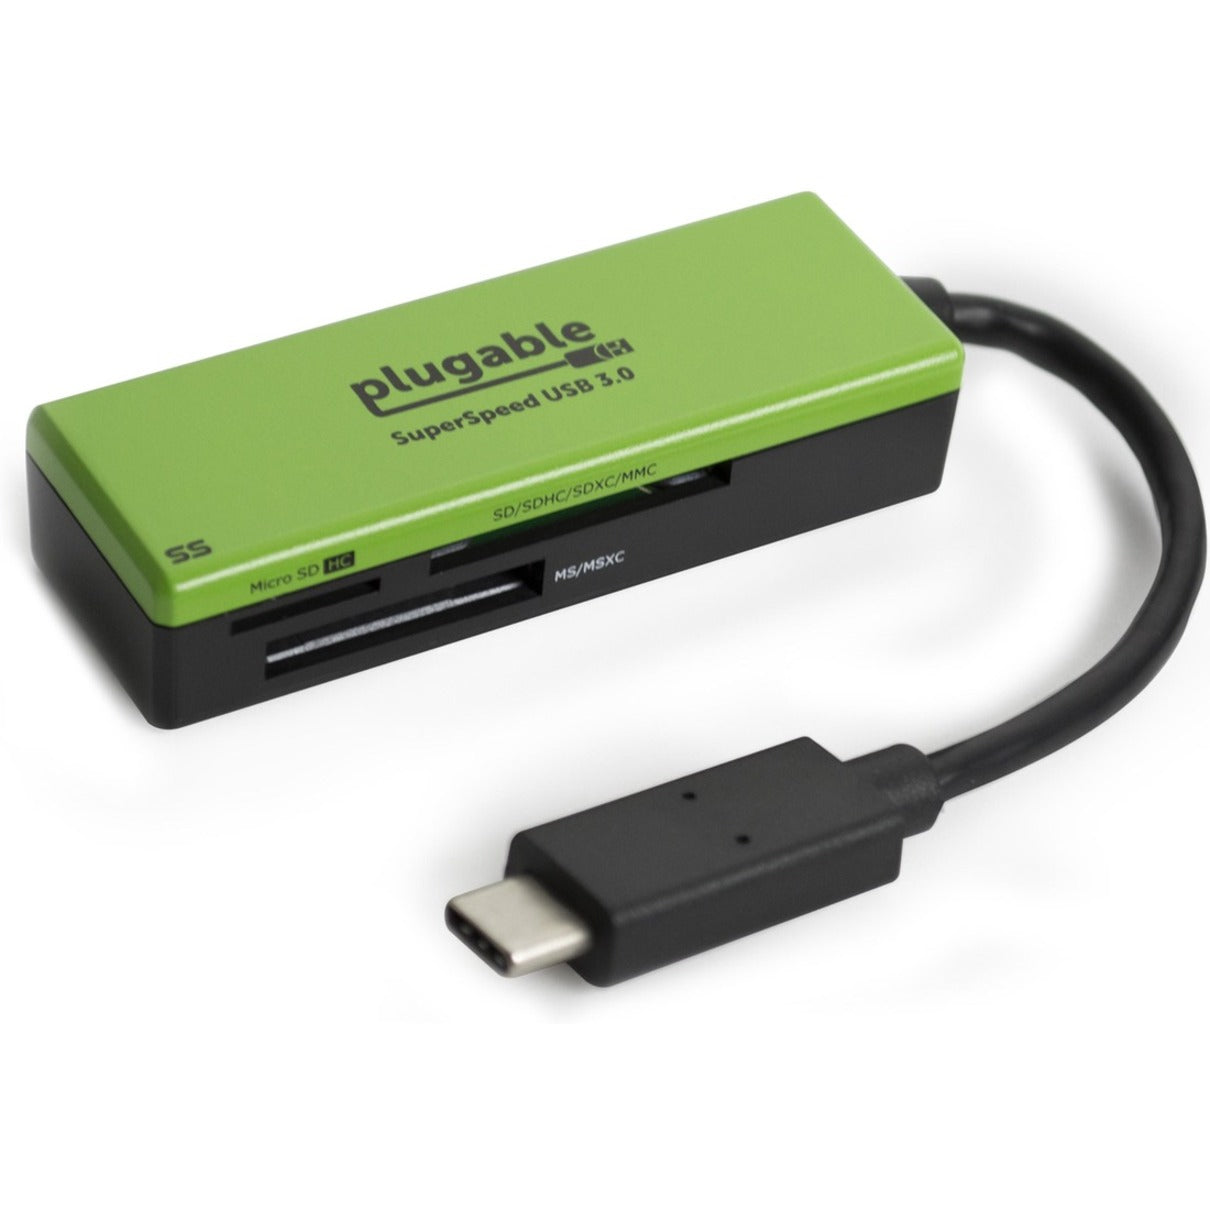 Plugable USBC-FLASH3 USB Type-C Flash Memory Card Reader, USB C Card Reader for SD, Micro SD, MMC, or MS Cards